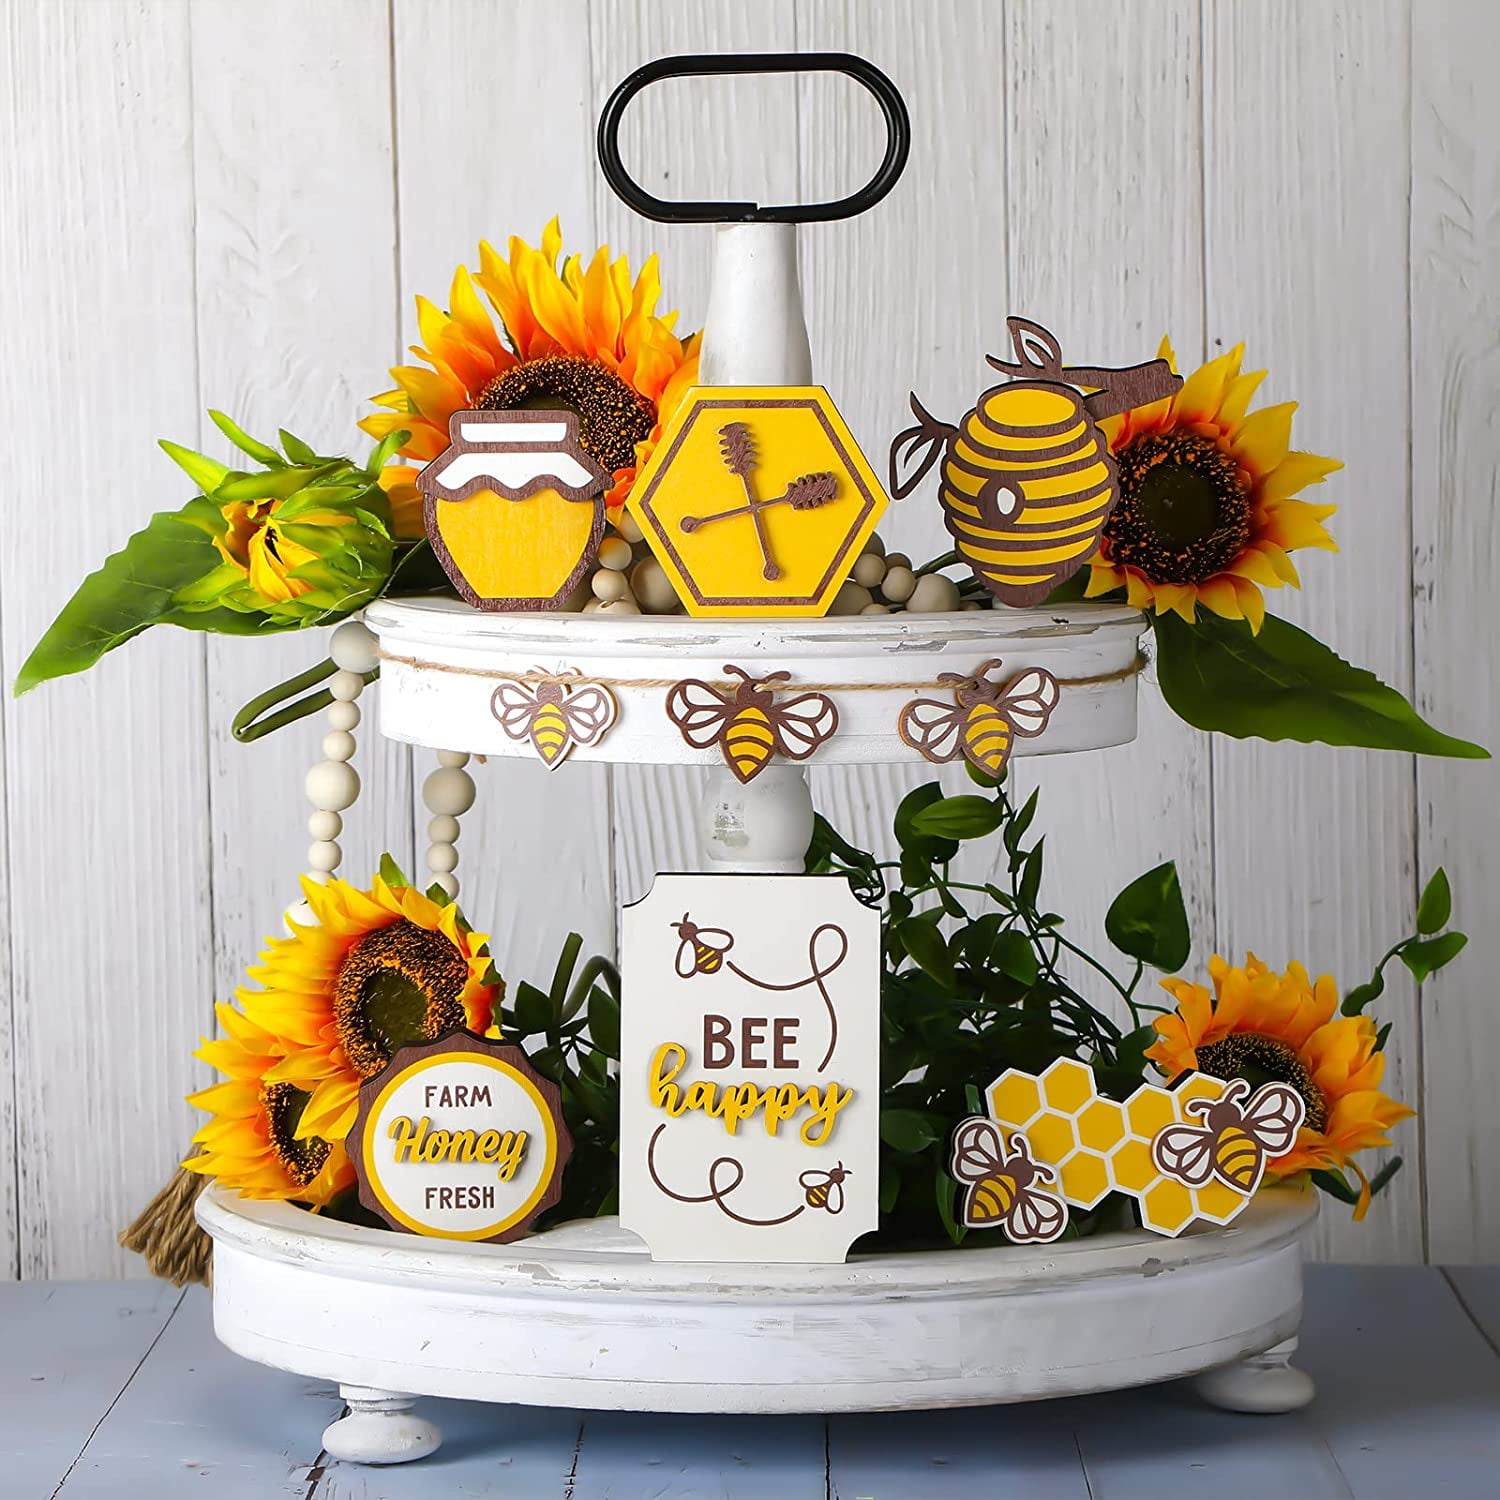 Honey Bee Decor,7pc Bee Tiered Tray Decor,Include Gnomes Plush, Artificial Sunflower,4 Bee Signs,Wood Bead garland,Summer Farmhouse Tiered Tray and